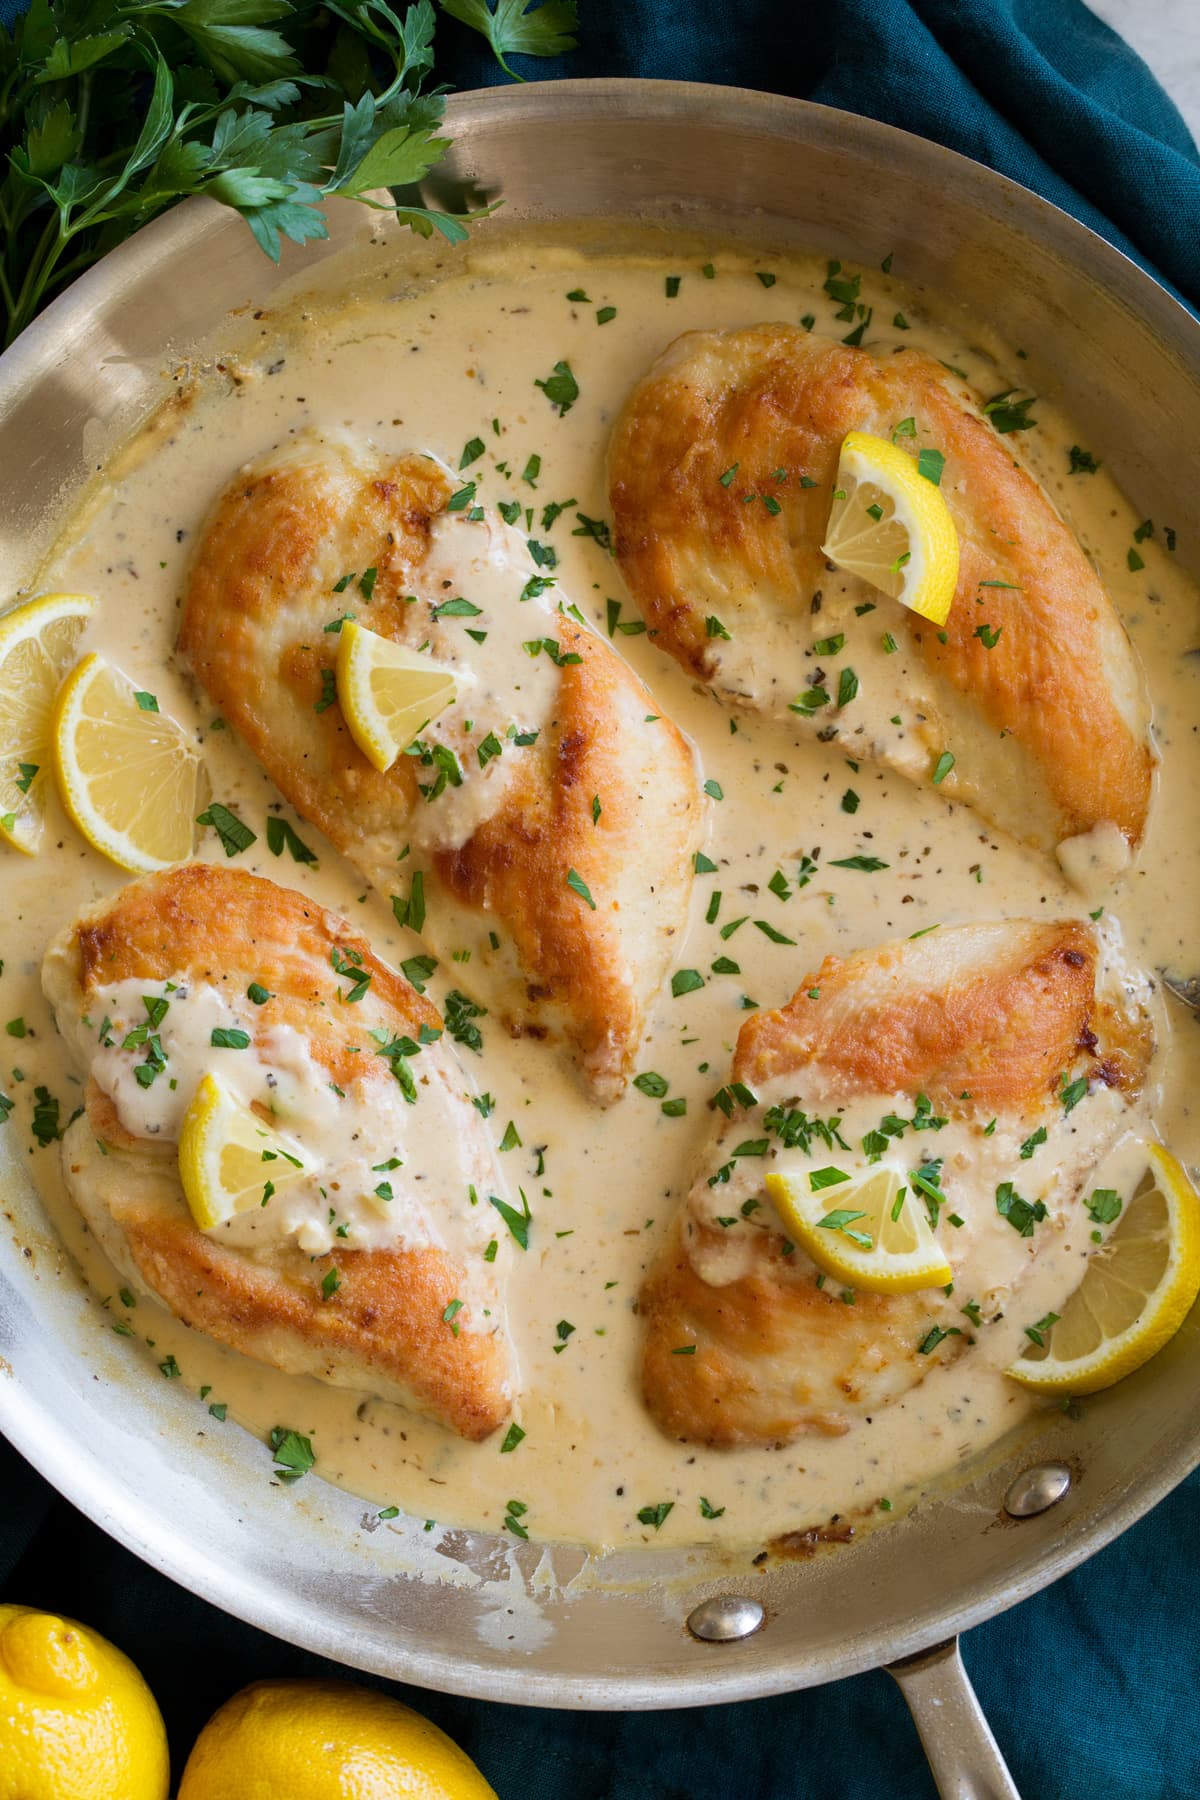 Four pan seared chicken breasts in a skillet with lemon romano sauce.